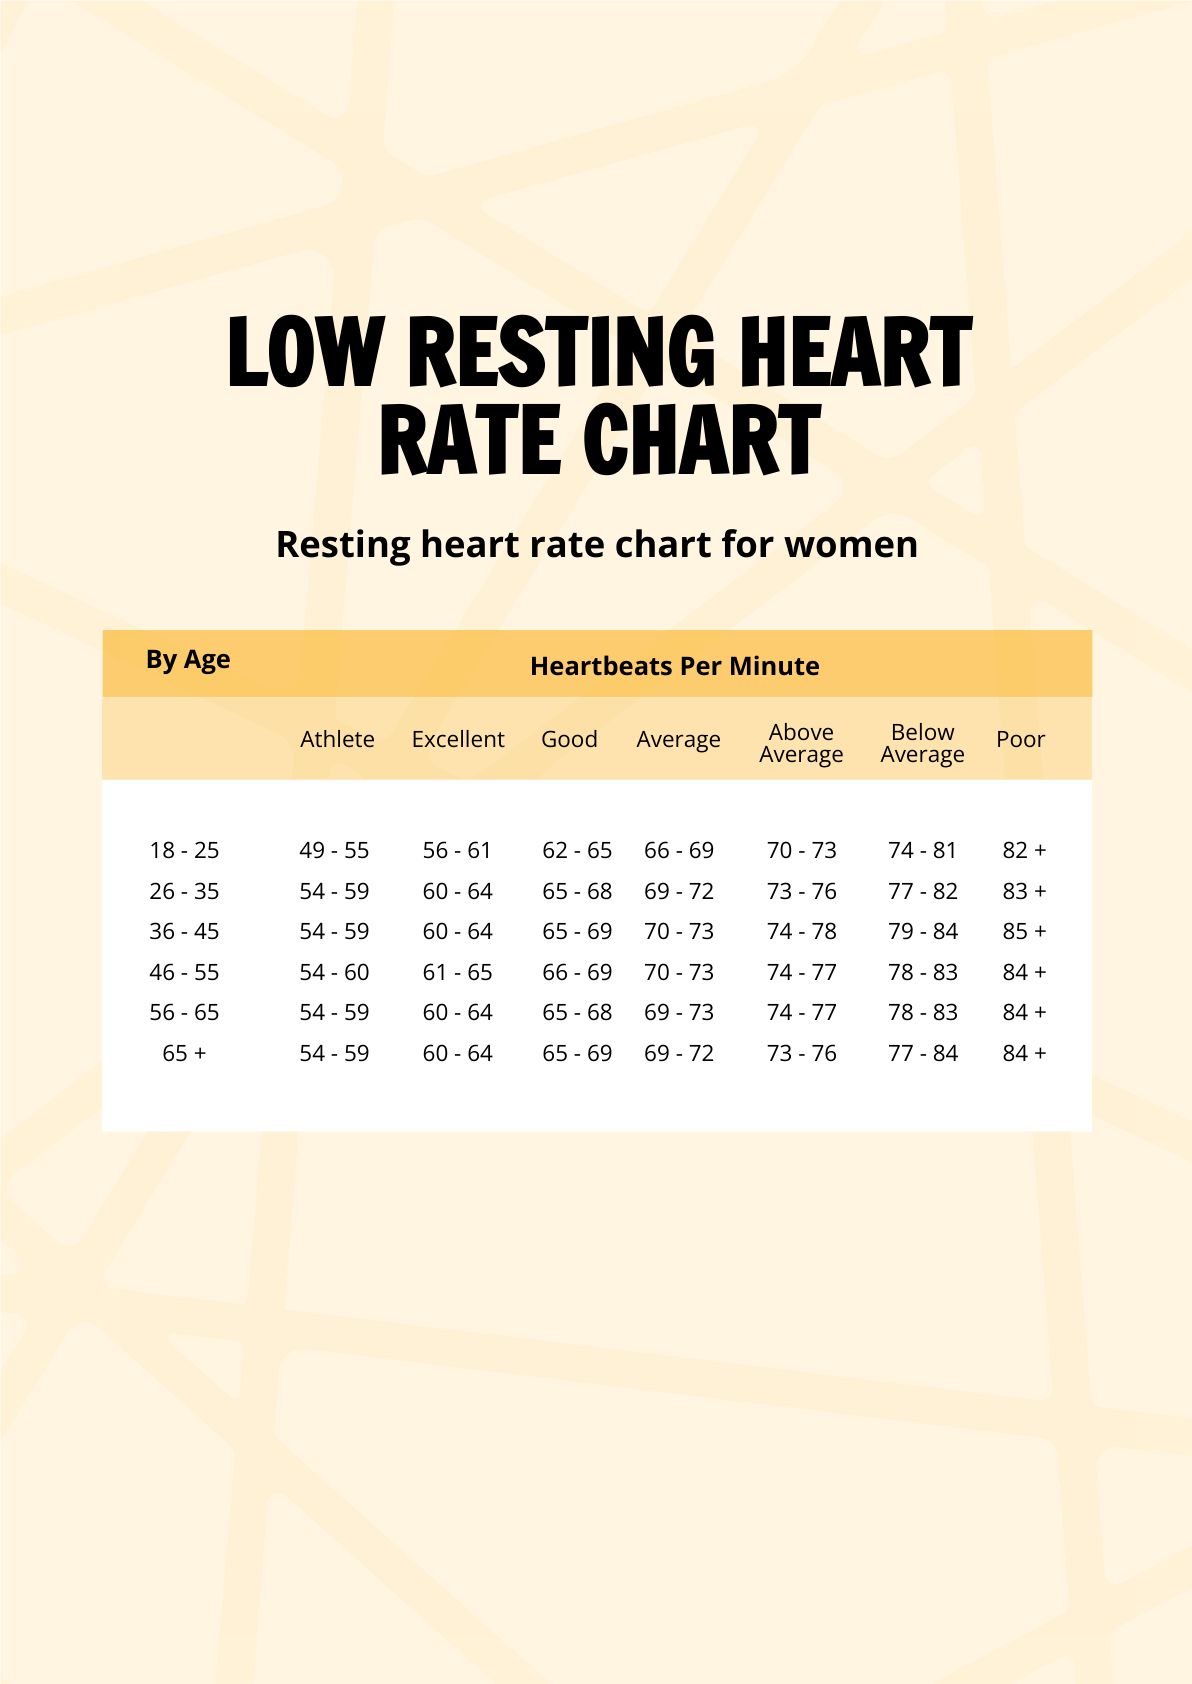 Low Resting Heart Rate Chart